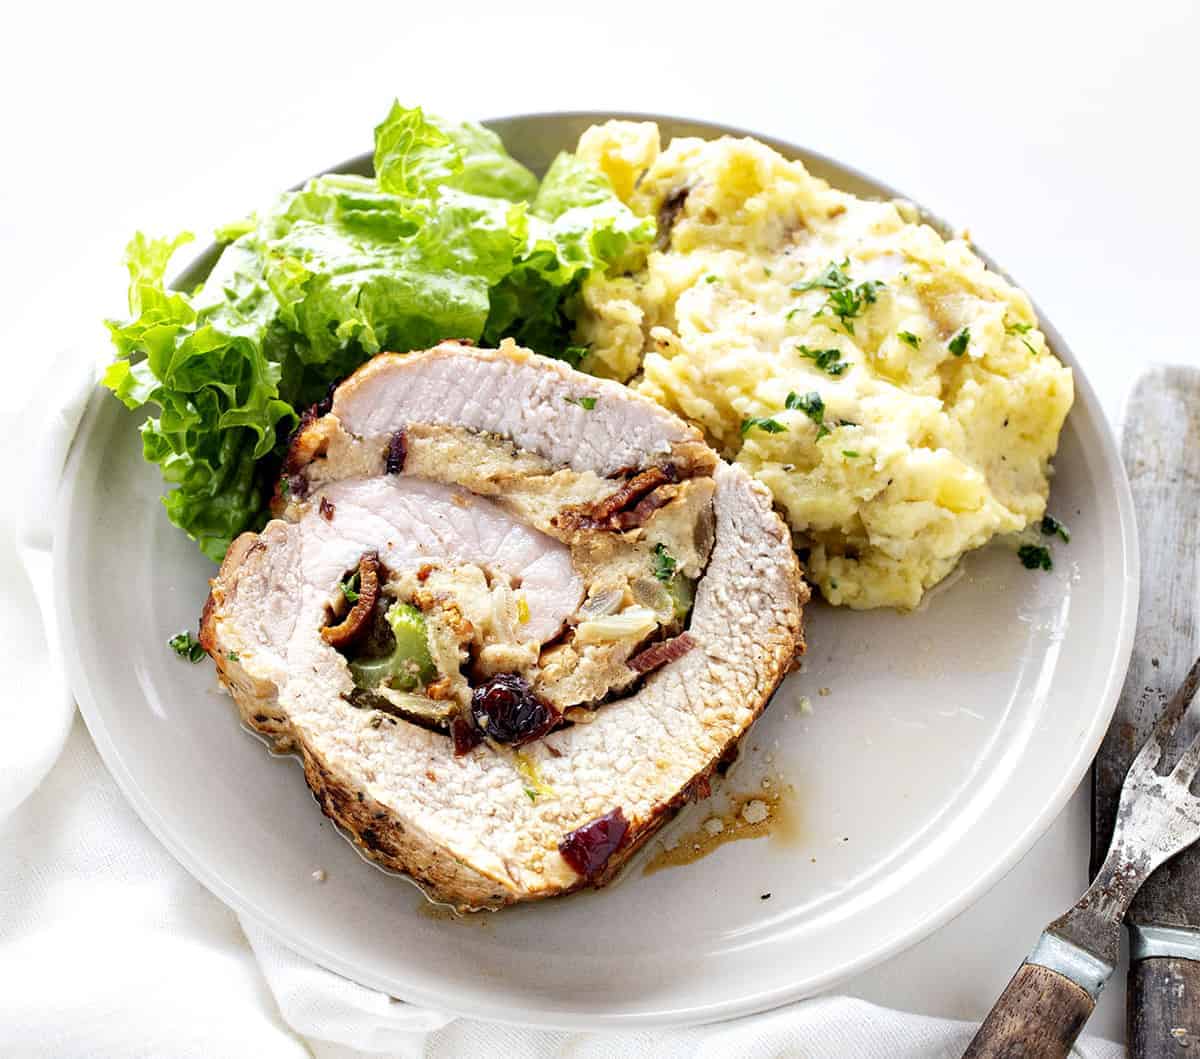 Cut Piece of Stuffed Pork Loin on a White Plate with Potatoes